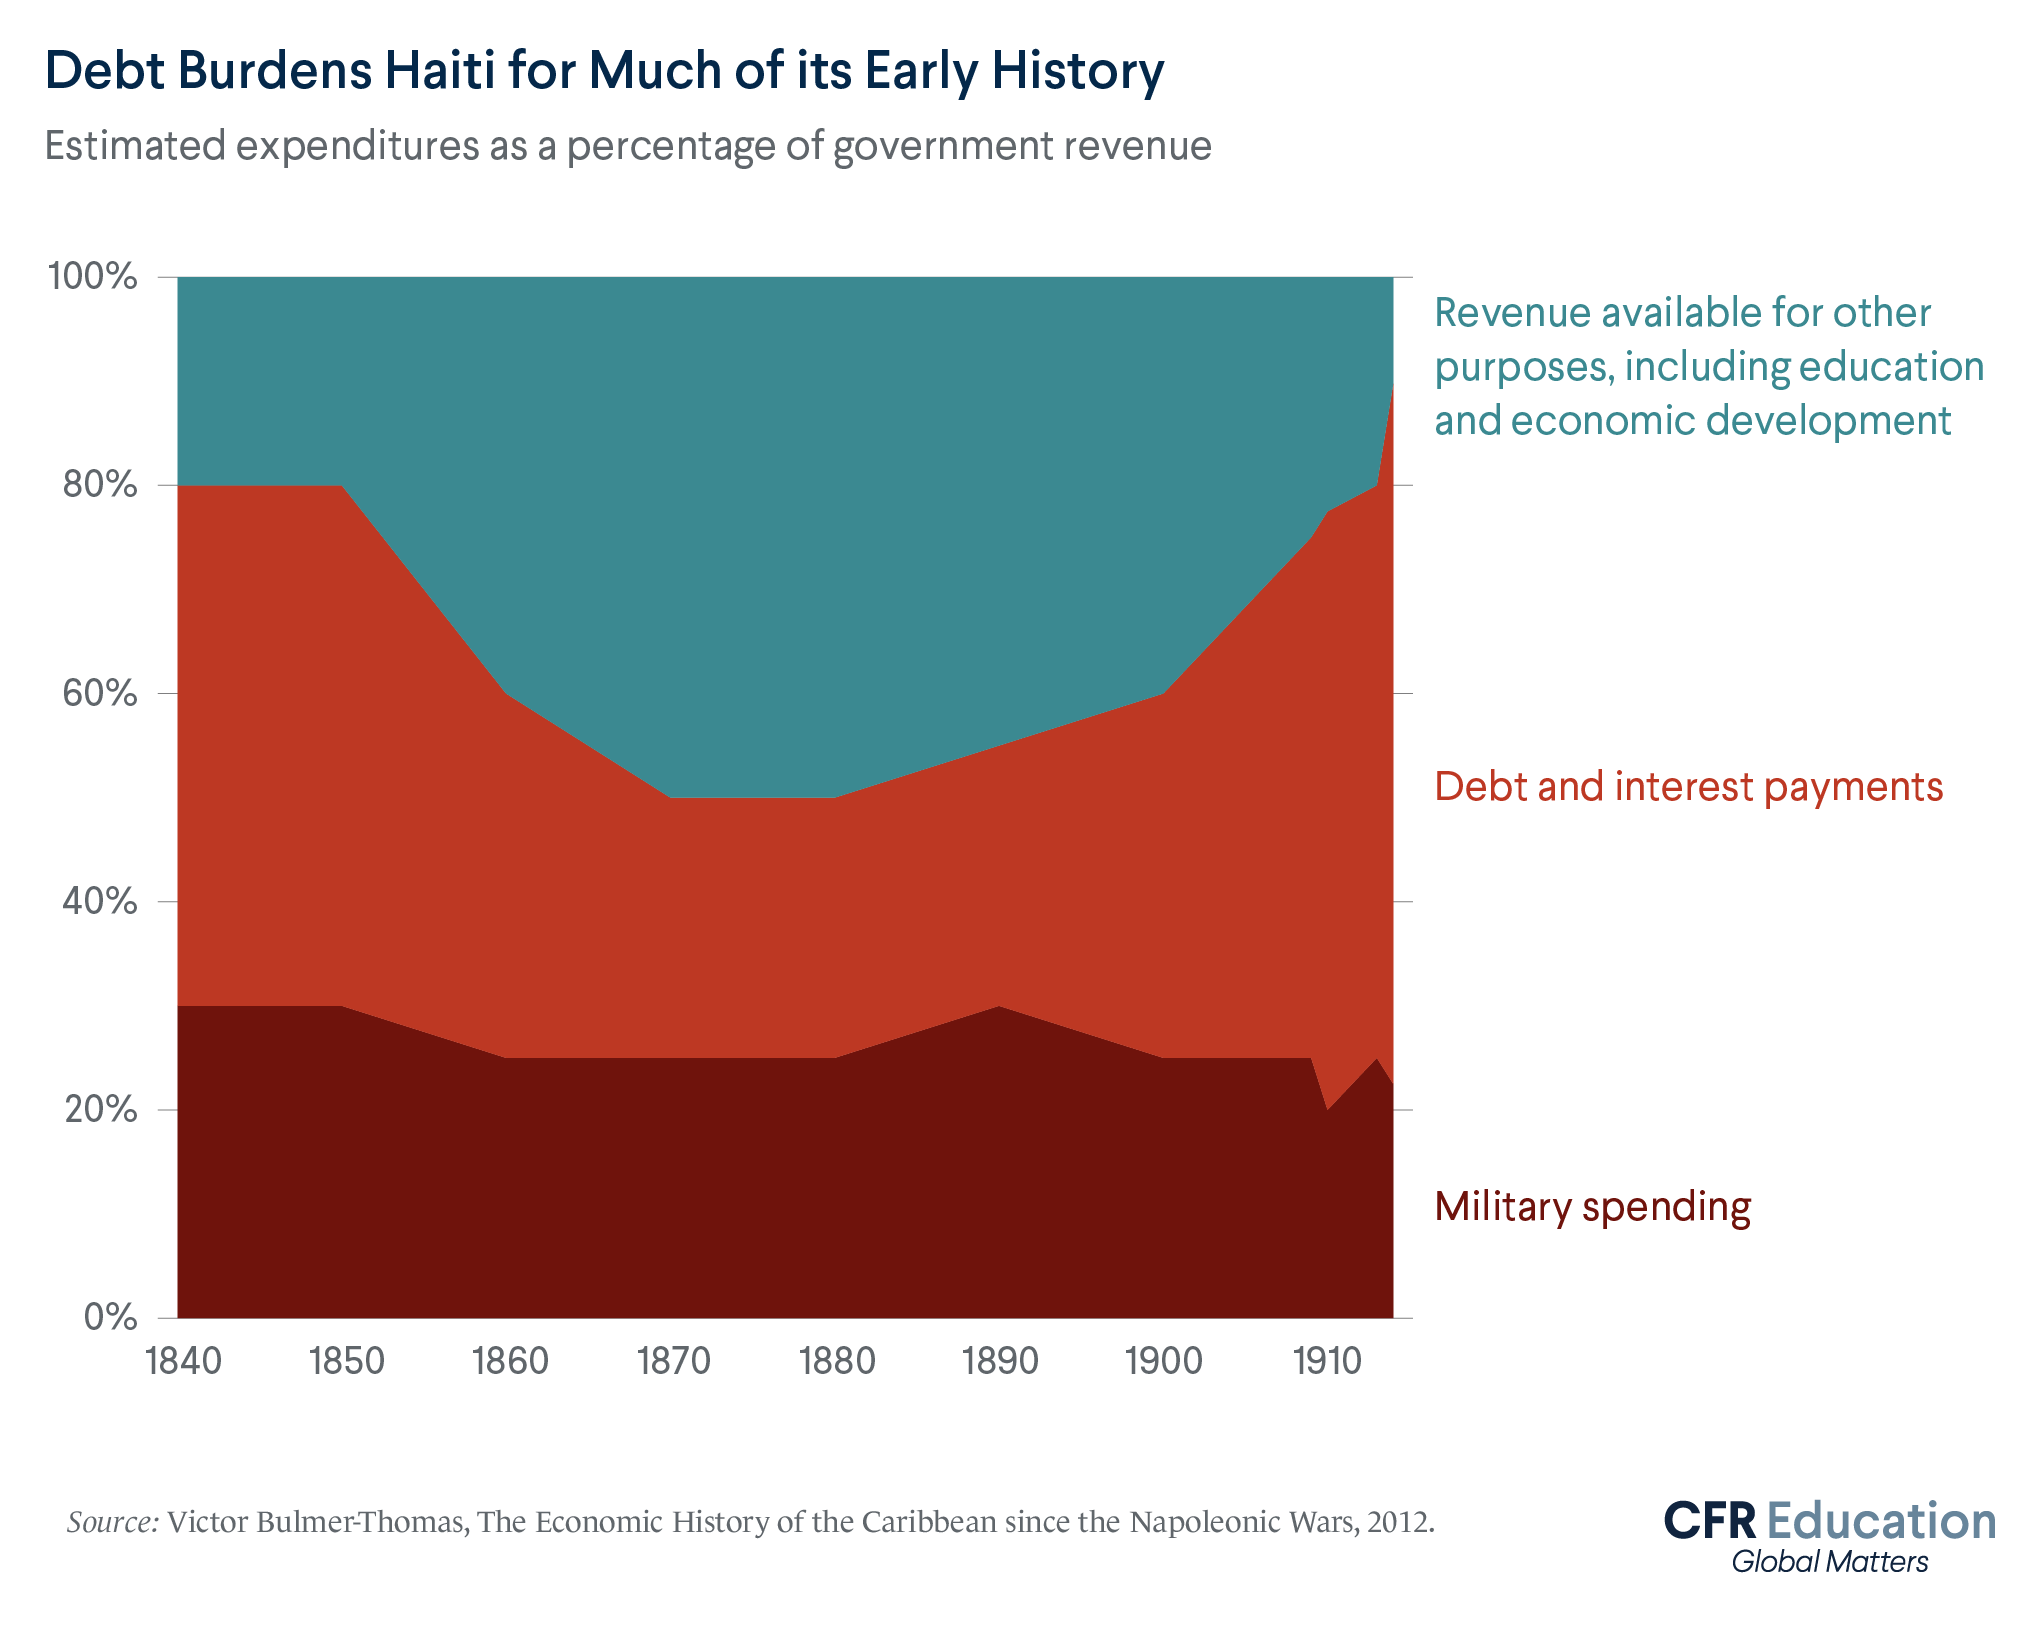 A chart showing that debt and interest payments made up a large part of Haiti's expenditures between 1840 and 1910.  For more info contact us at cfr_education@cfr.org.